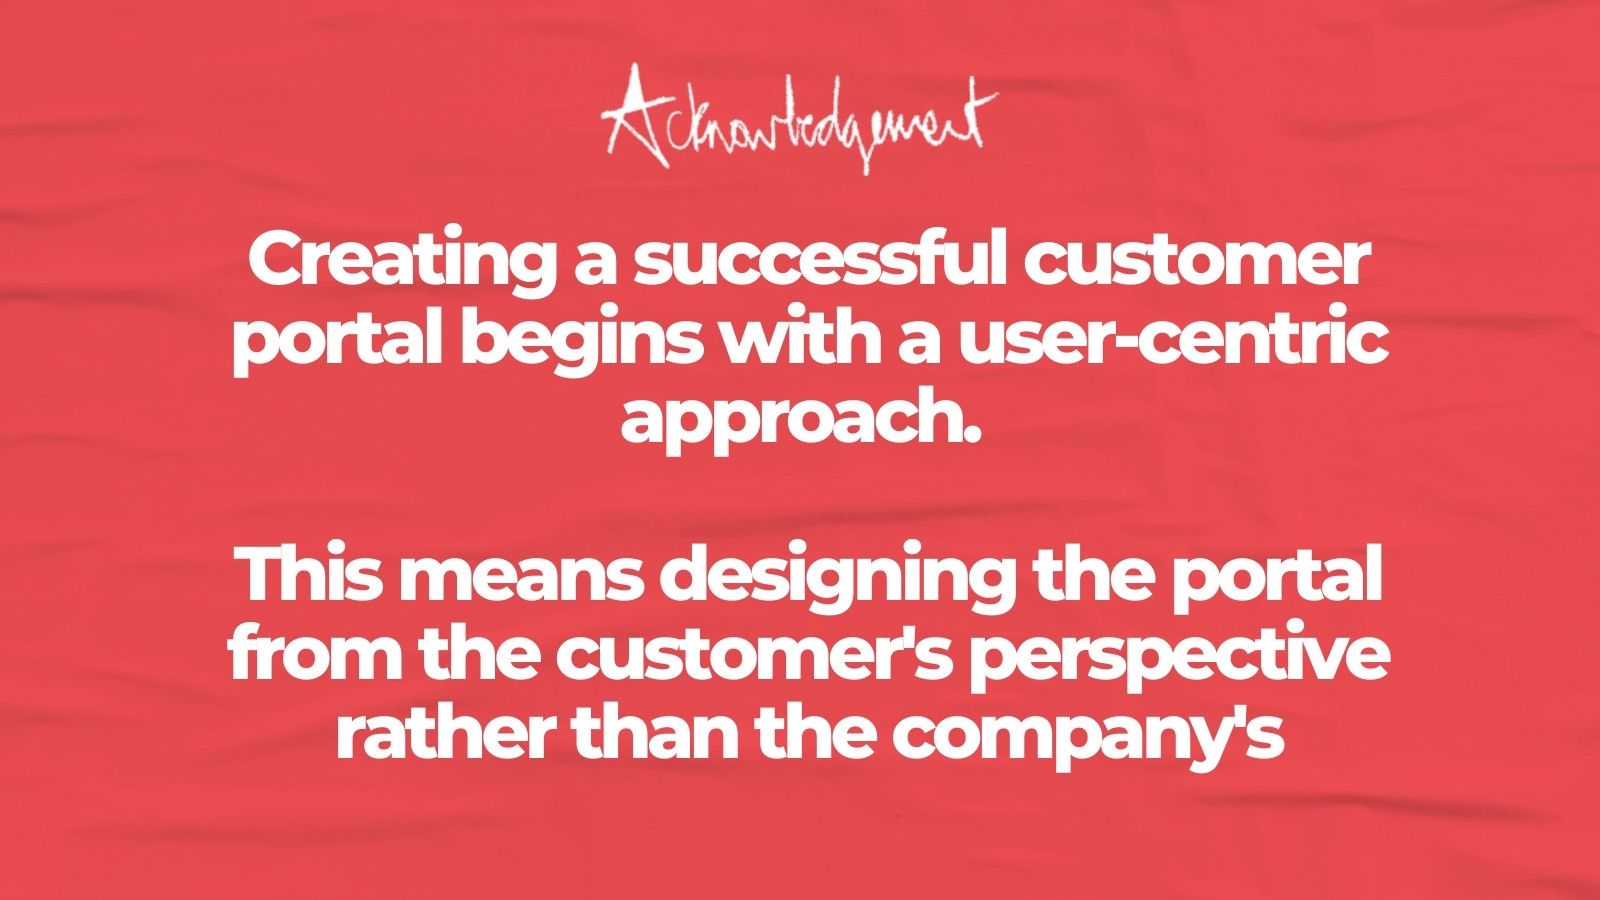 "Creating a successful customer portal begins with a user-centric approach. This means designing the portal from the customer's perspective rather than the company's" title graphic